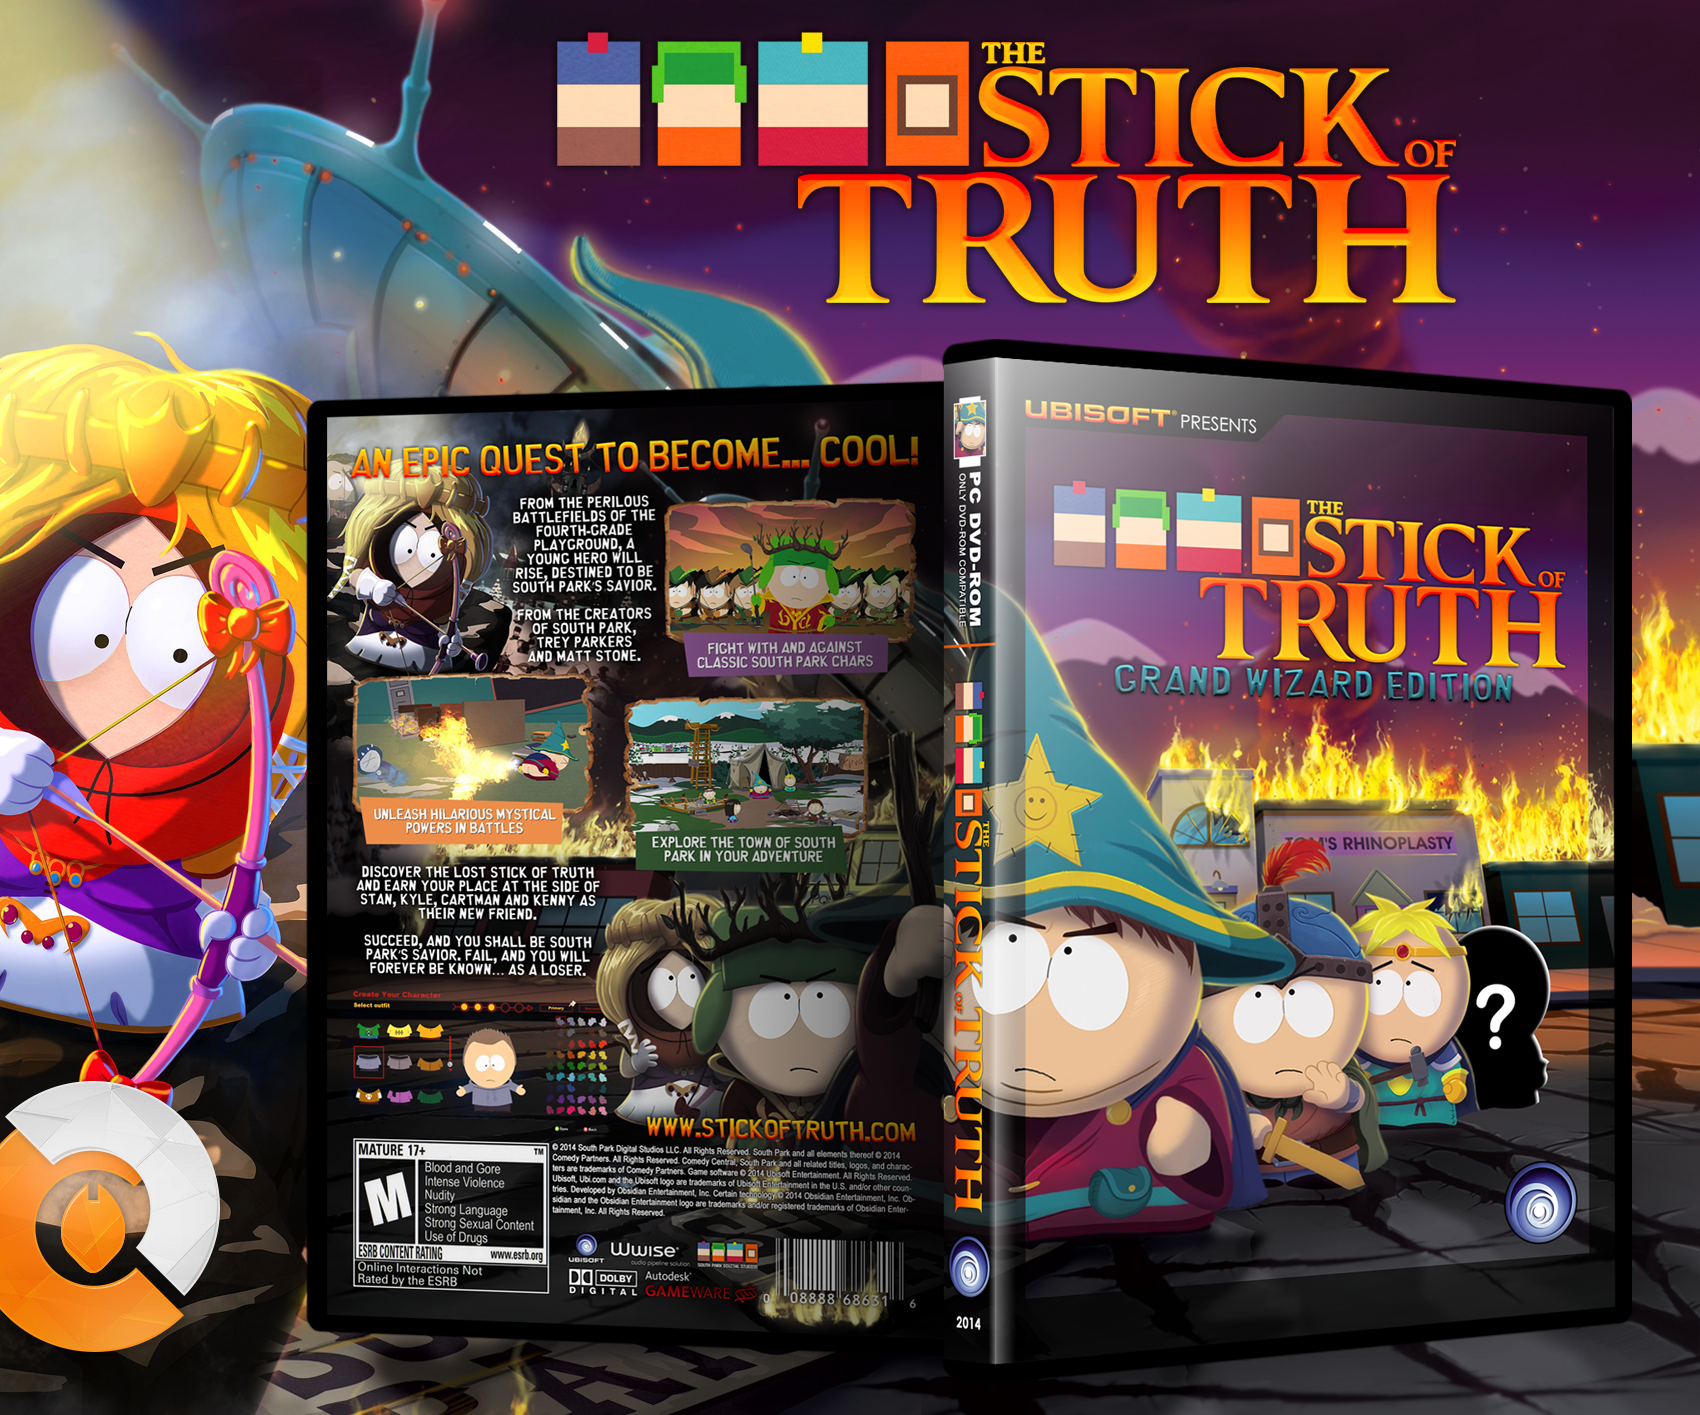 South Park: The Stick of Truth box cover